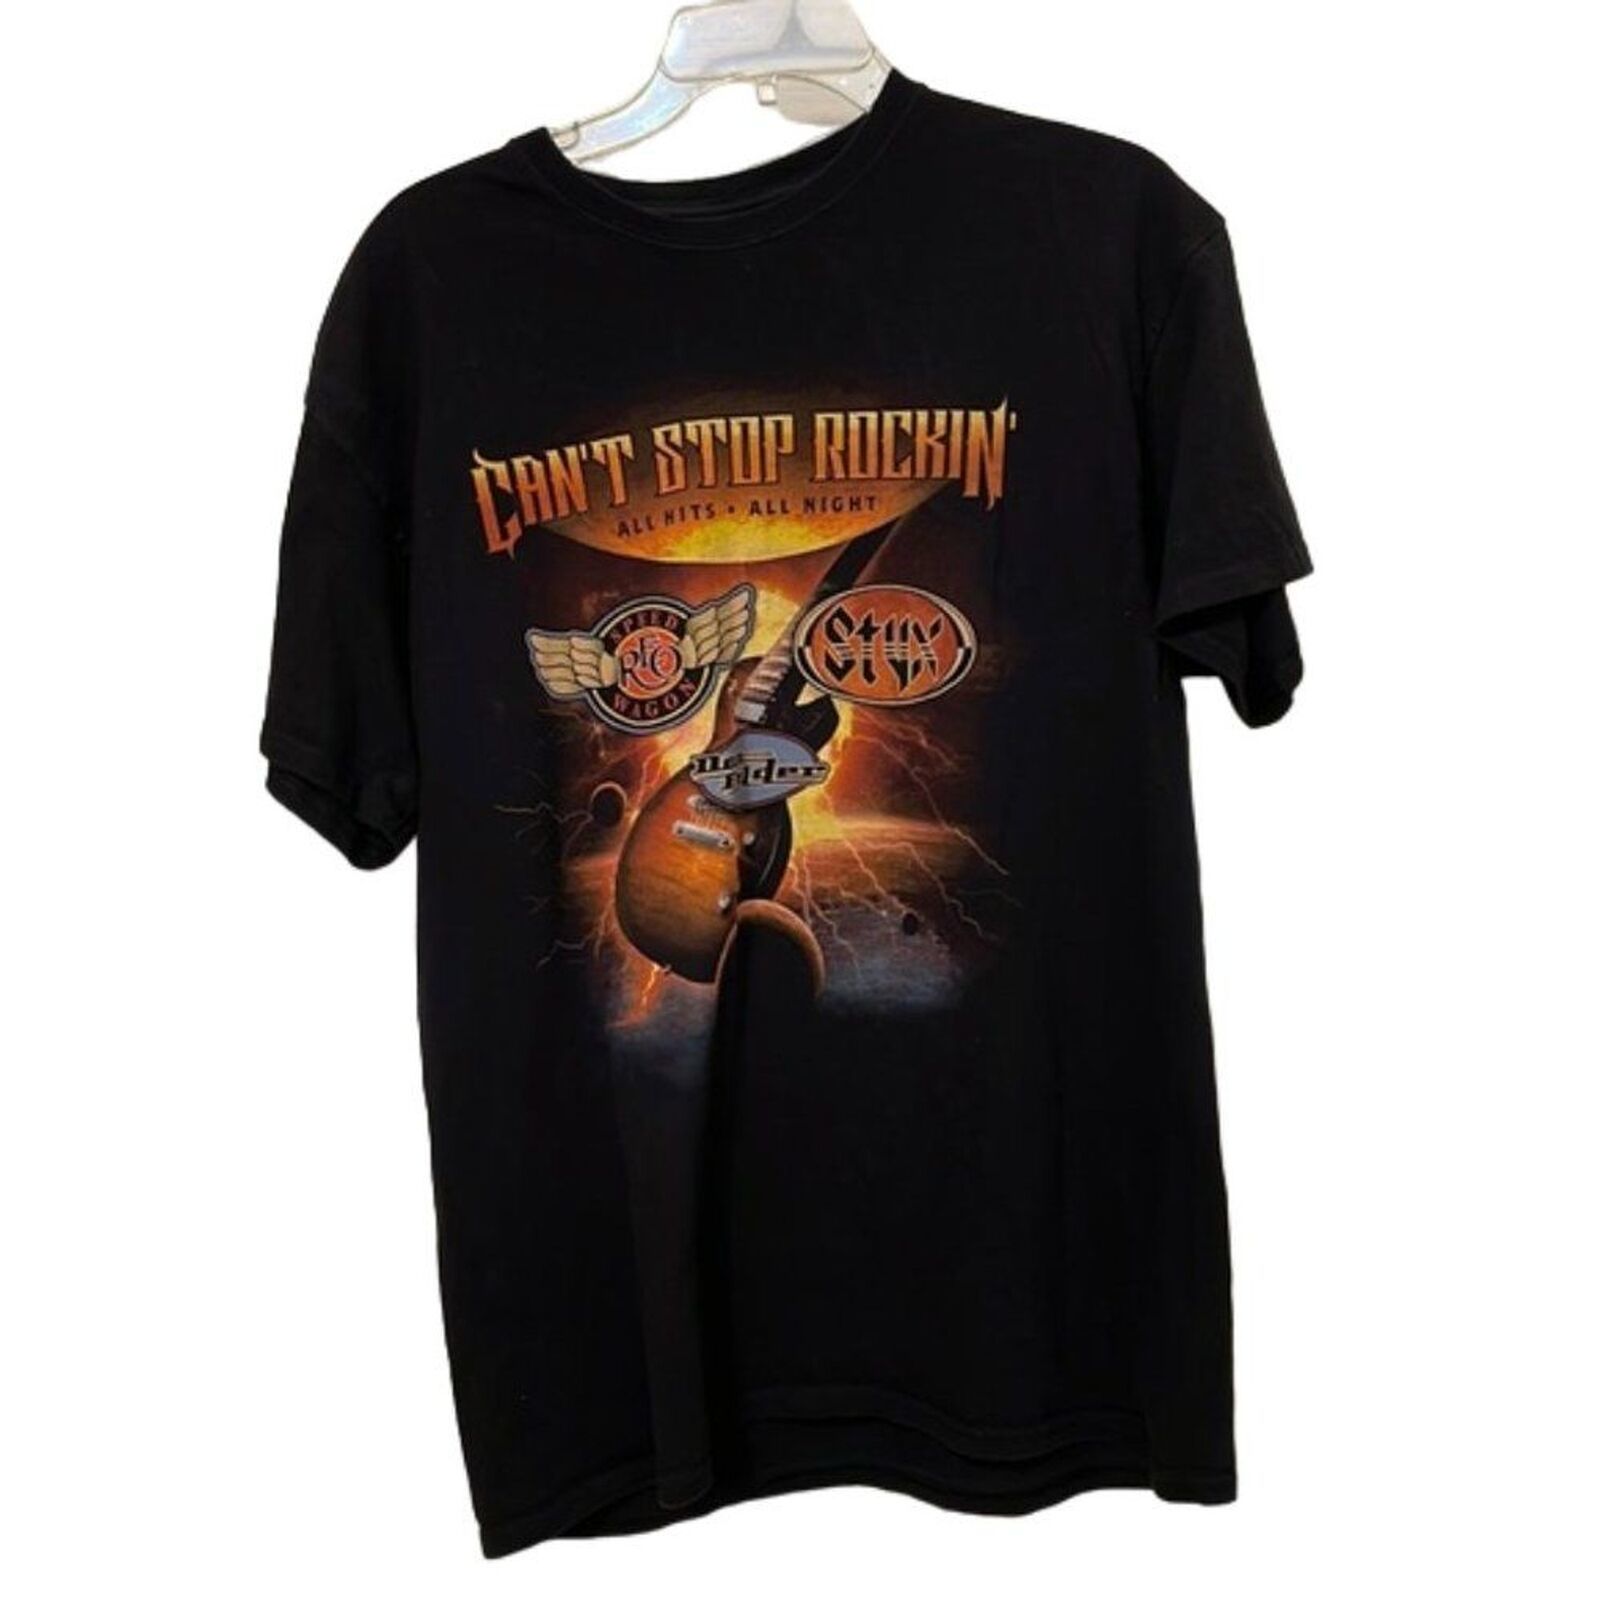 Primary image for Can't Stop Rockin 2018 Tour Adult Large T-Shirt Styx REO Speed Wagon Don Felder